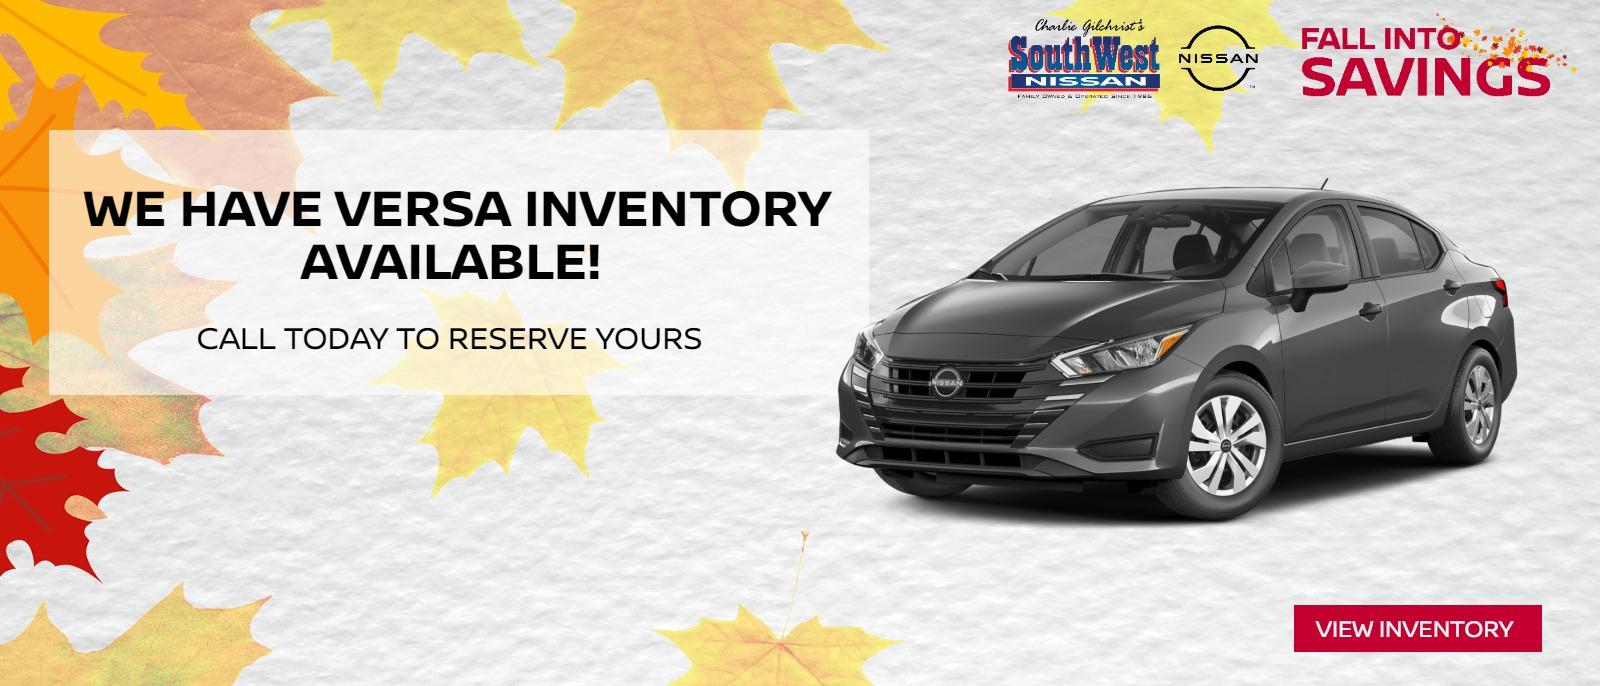 We have Versa inventory available!! Call today to reserve yours!